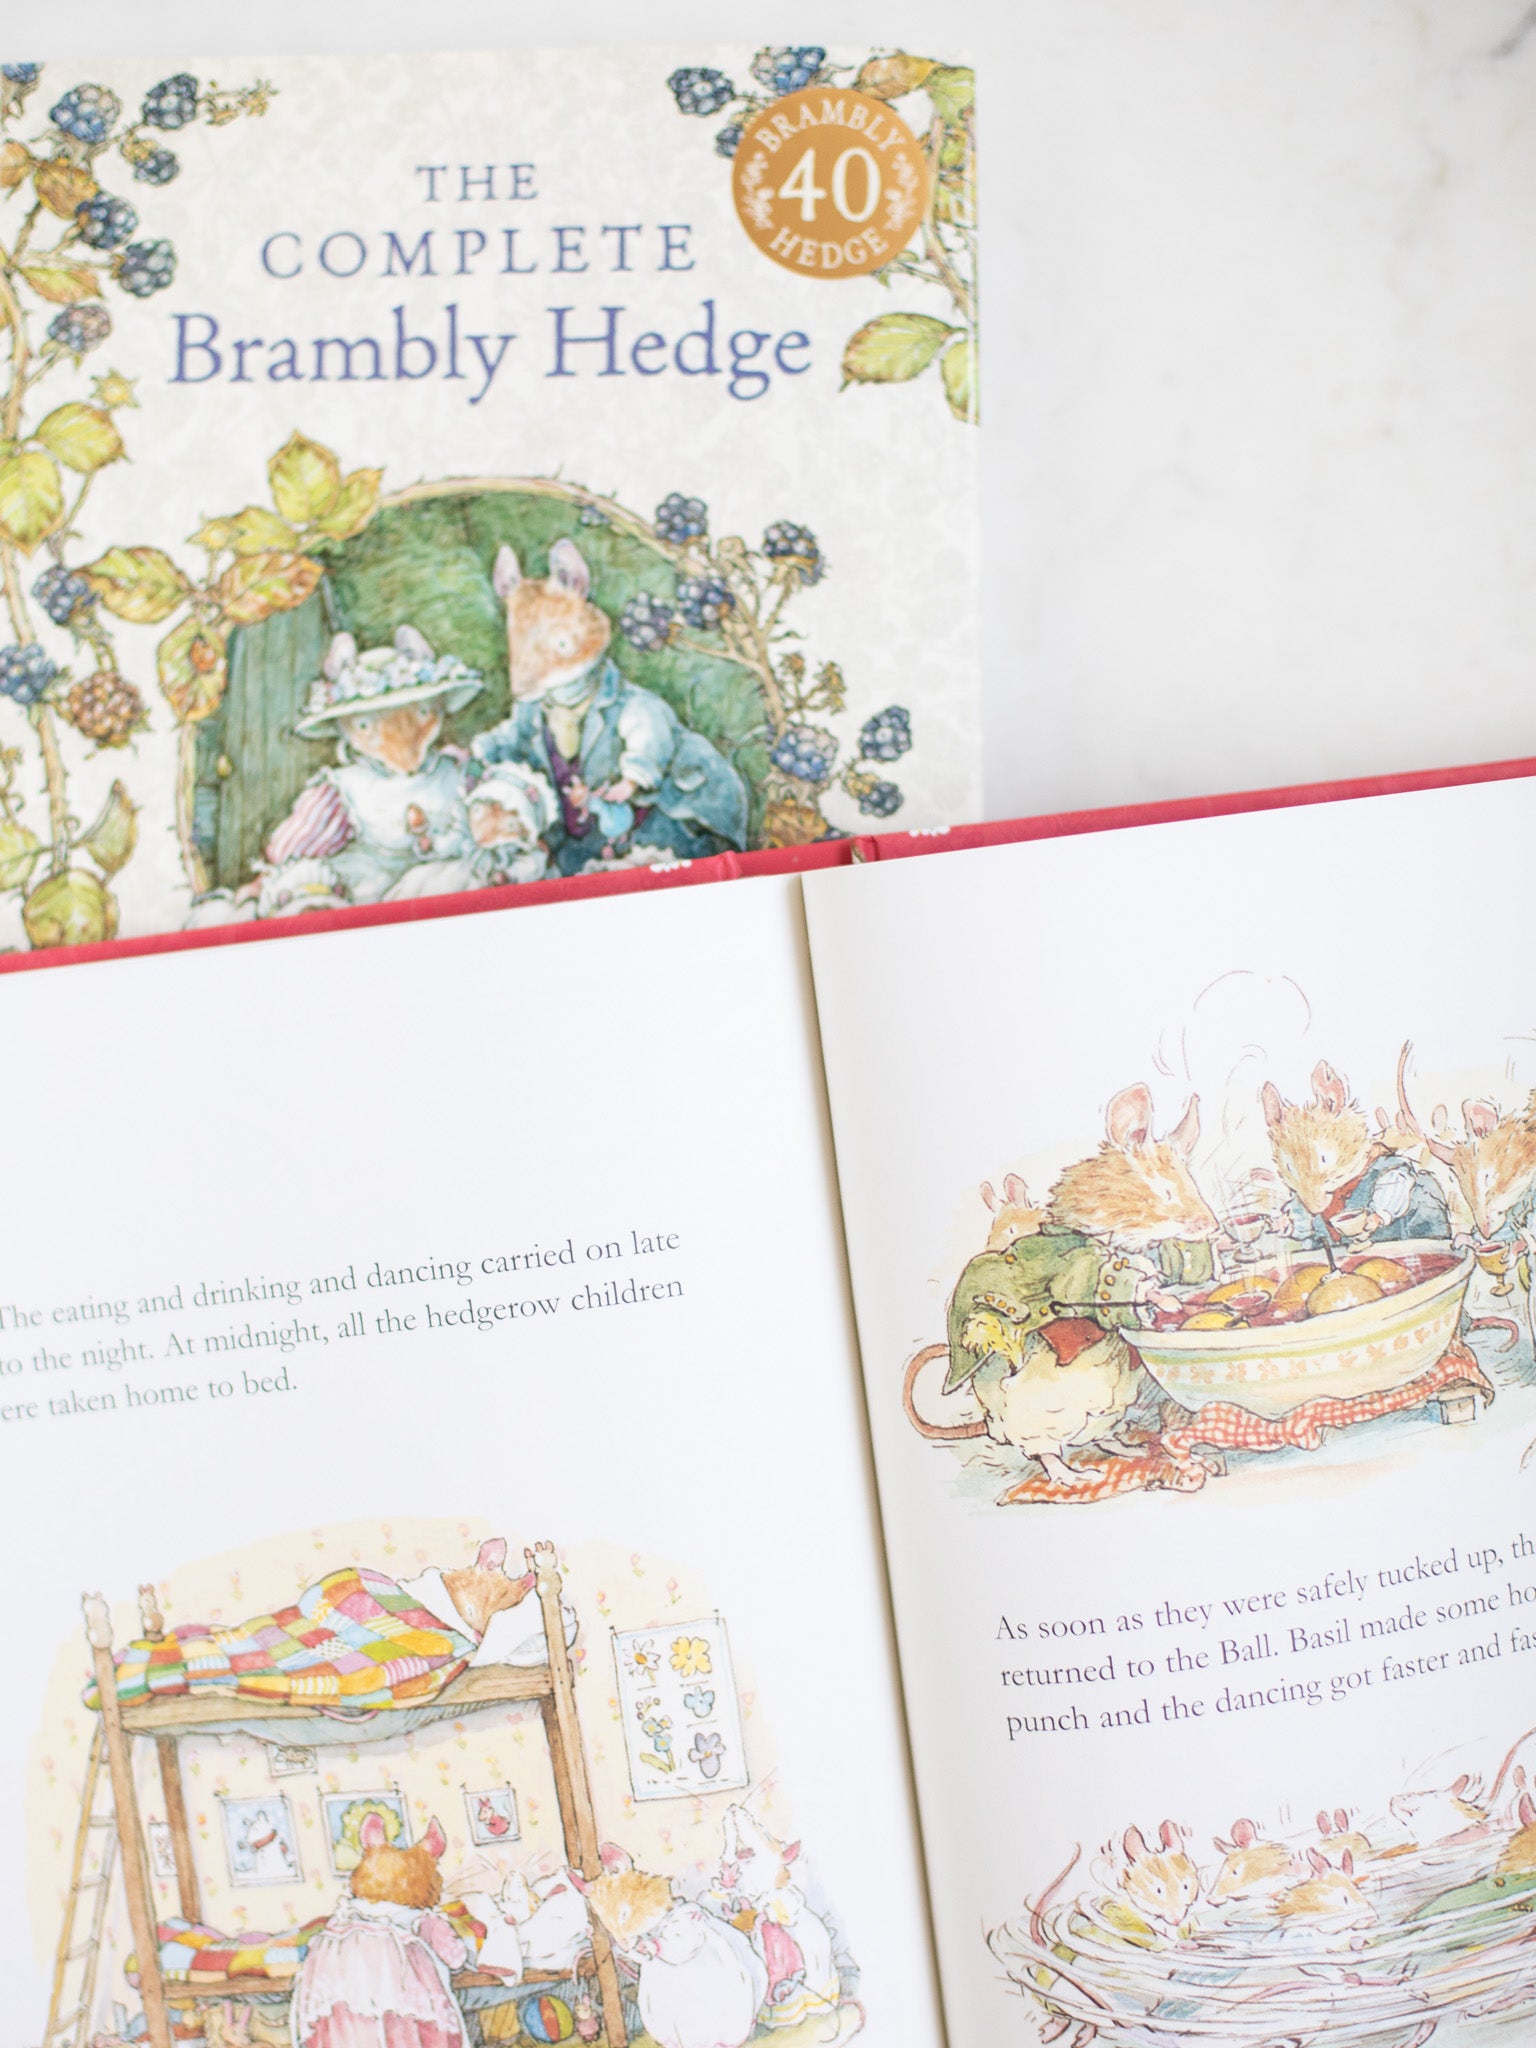 The Brambly Hedge Library 8 Books Set By Jill Barklem - Ages 3-6